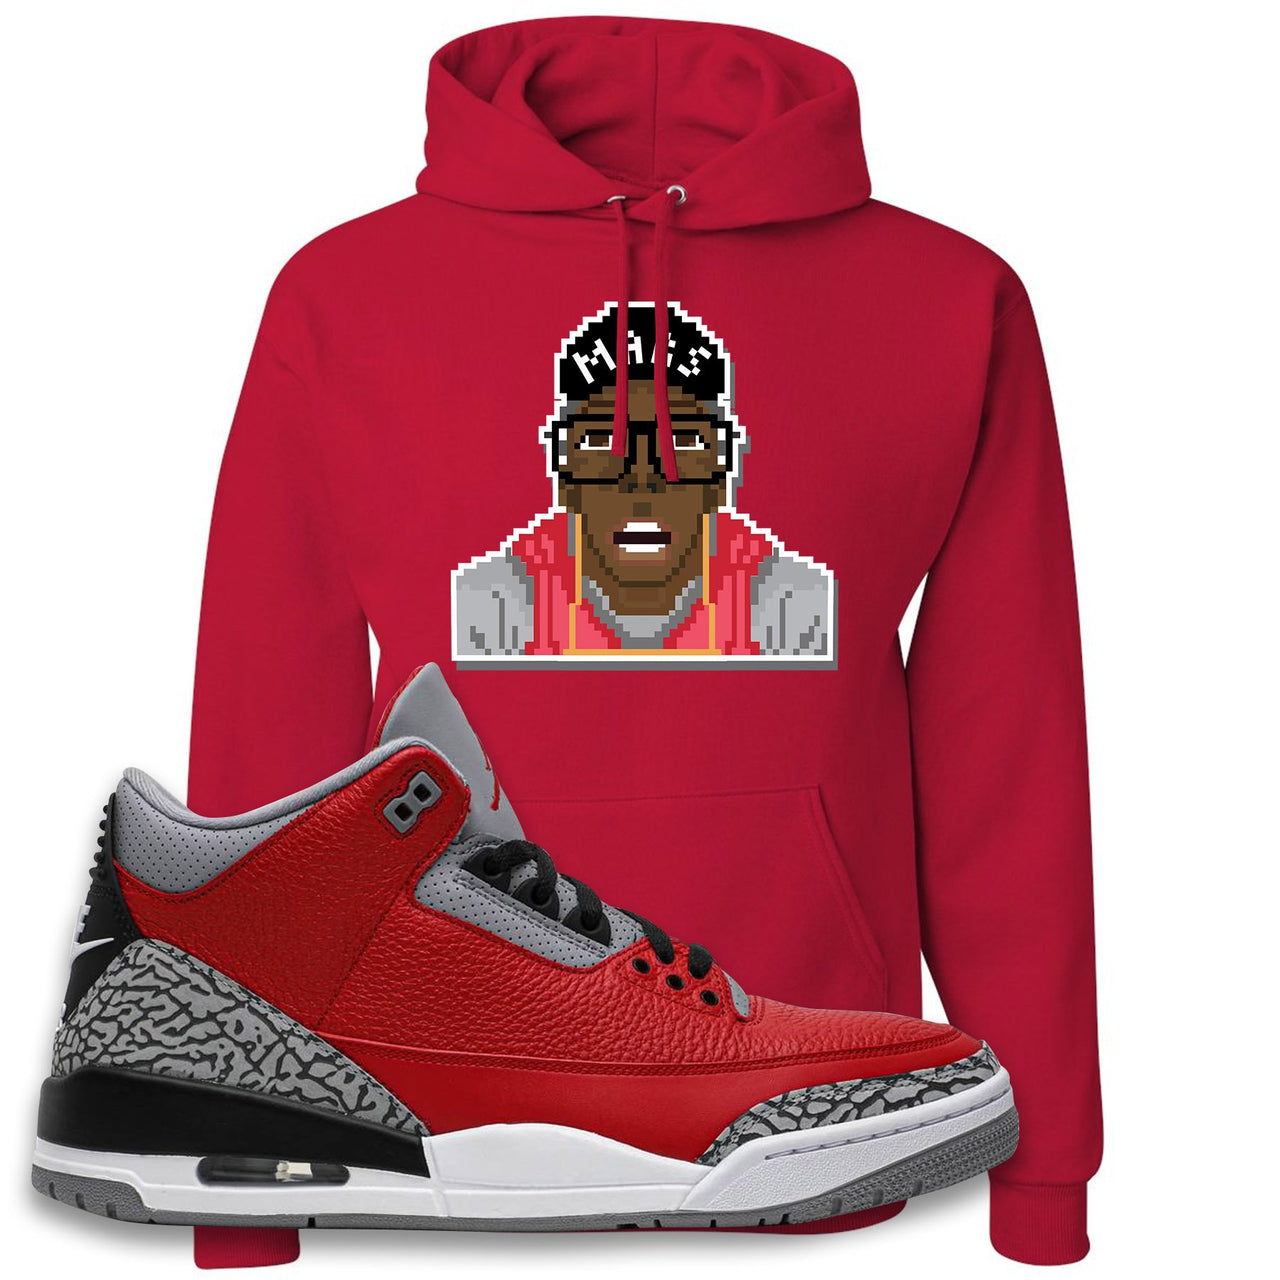 Jordan 3 Red Cement Chicago All-Star Sneaker True Red Pullover Hoodie | Hoodie to match Jordan 3 All Star Red Cement Shoes | Mars Pixel